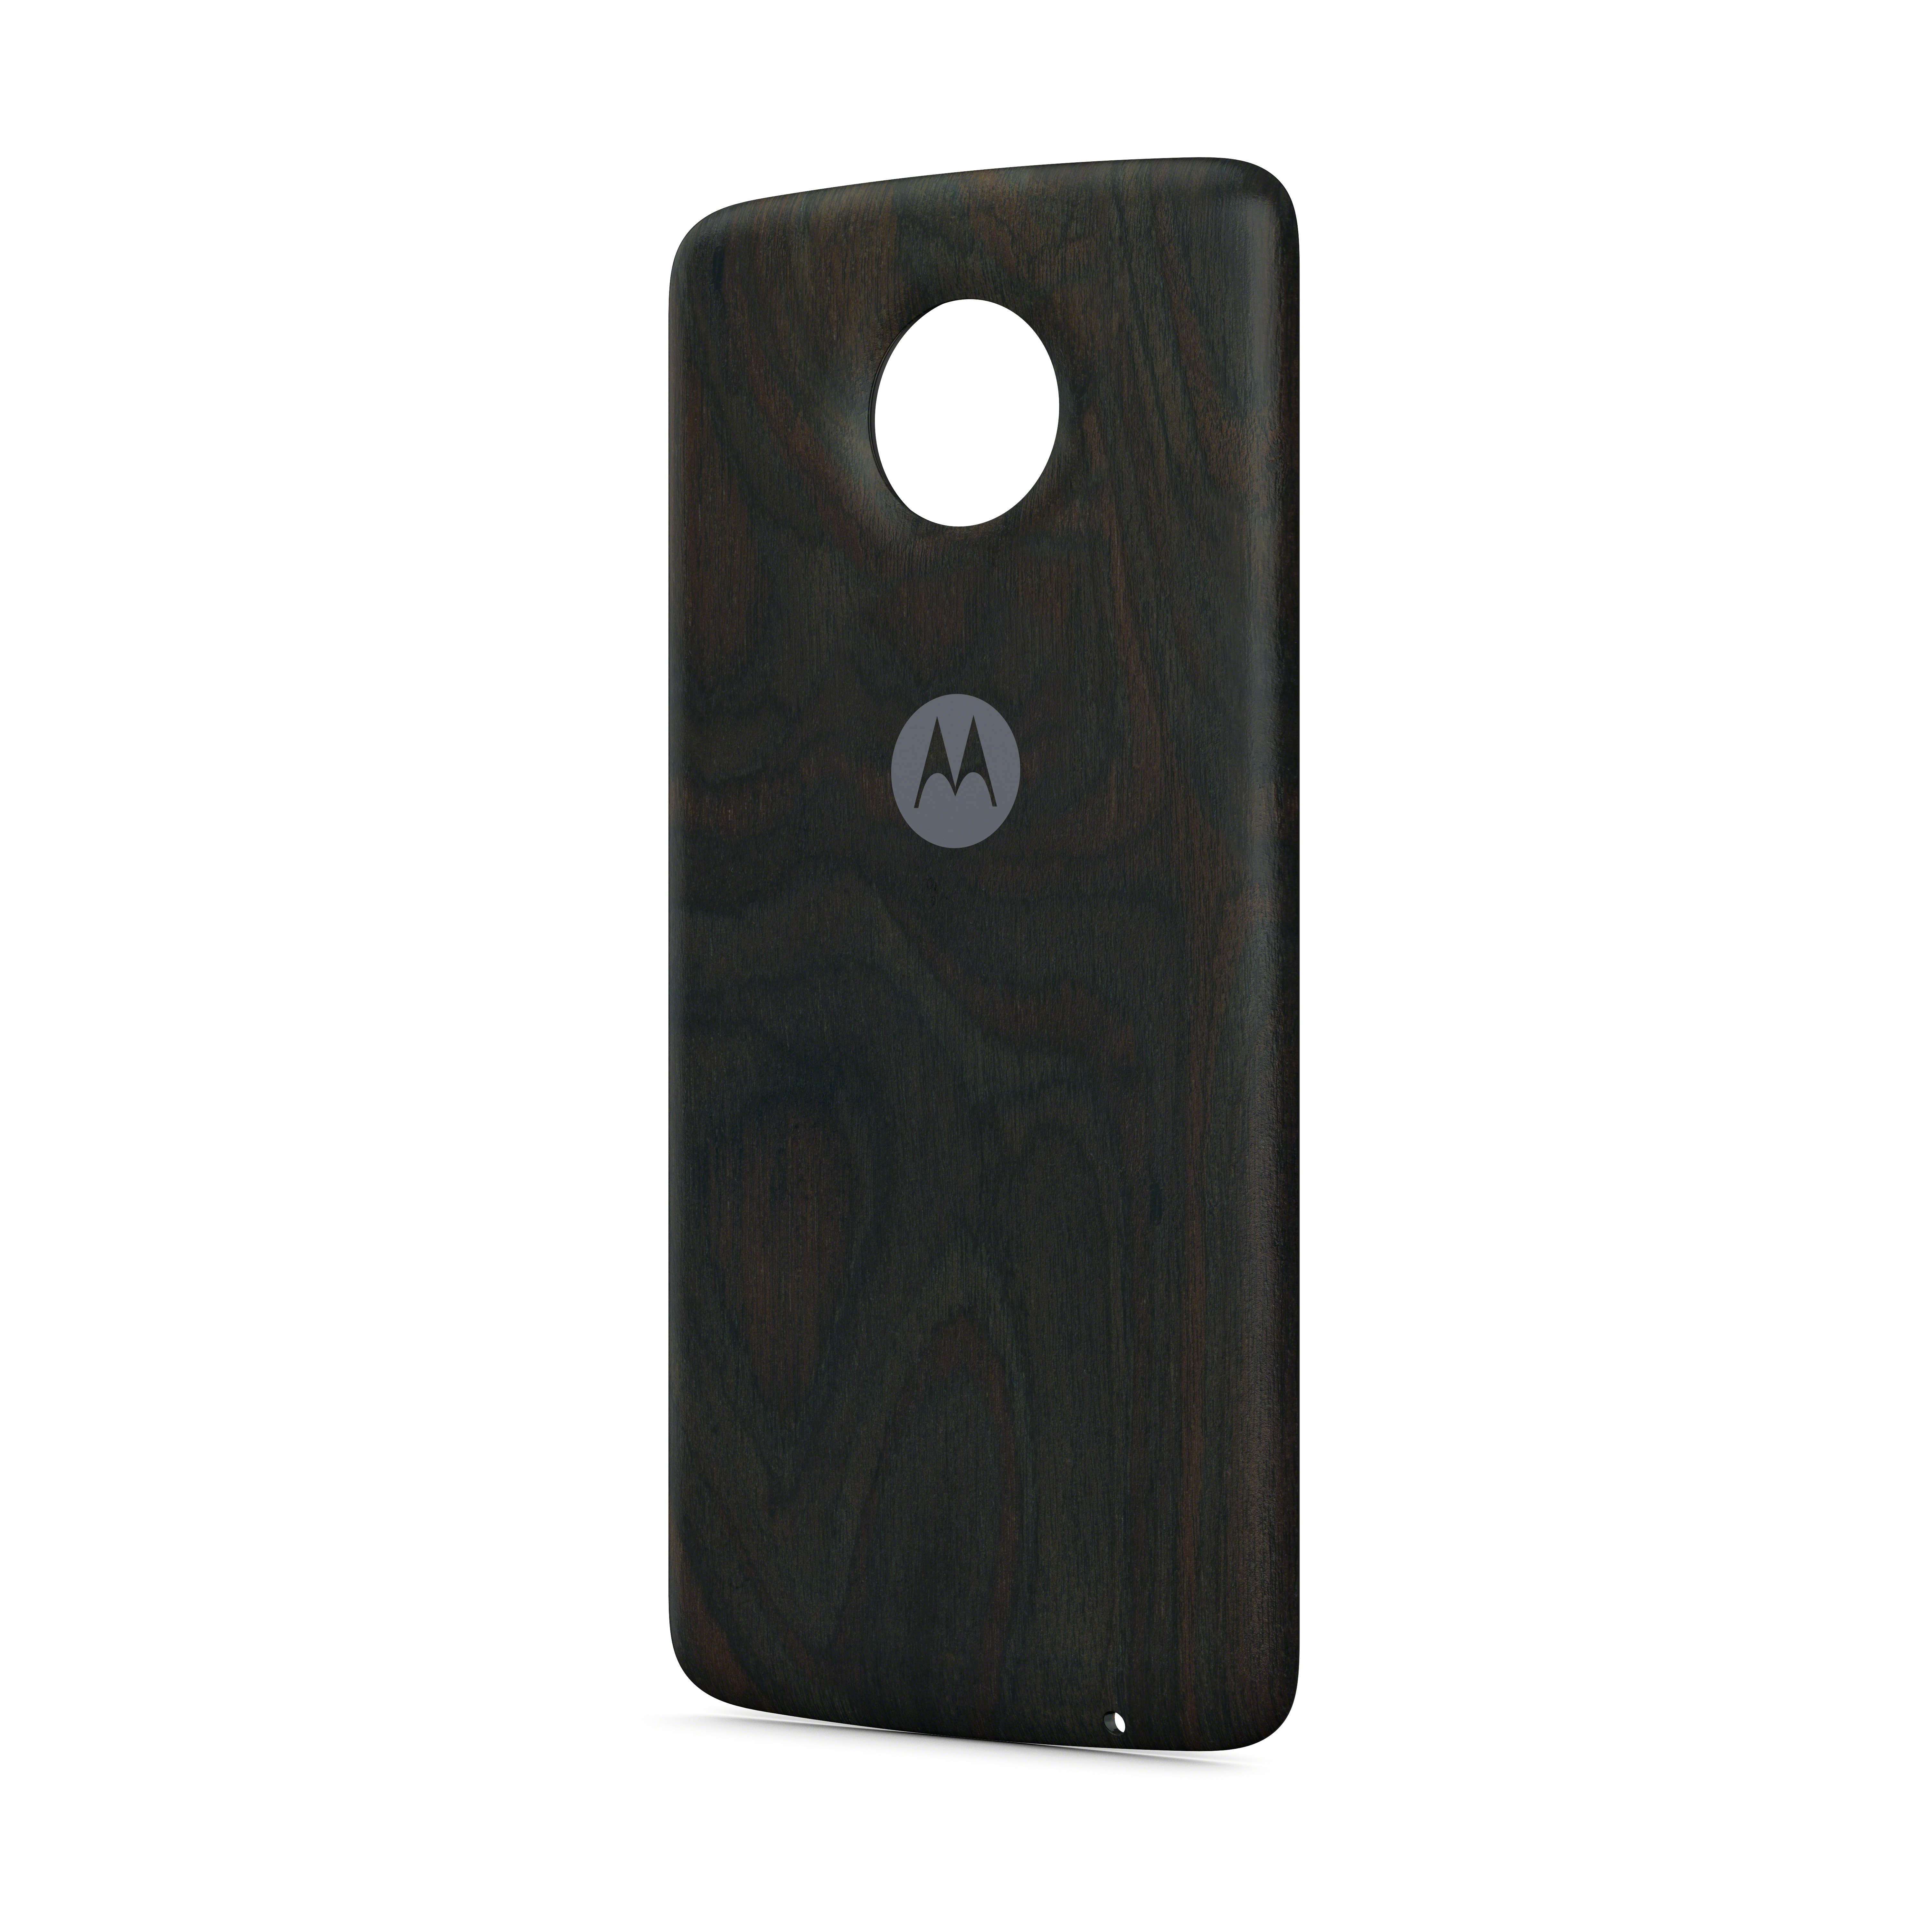 Motorola Announces New Moto Mods with Prices Starting at